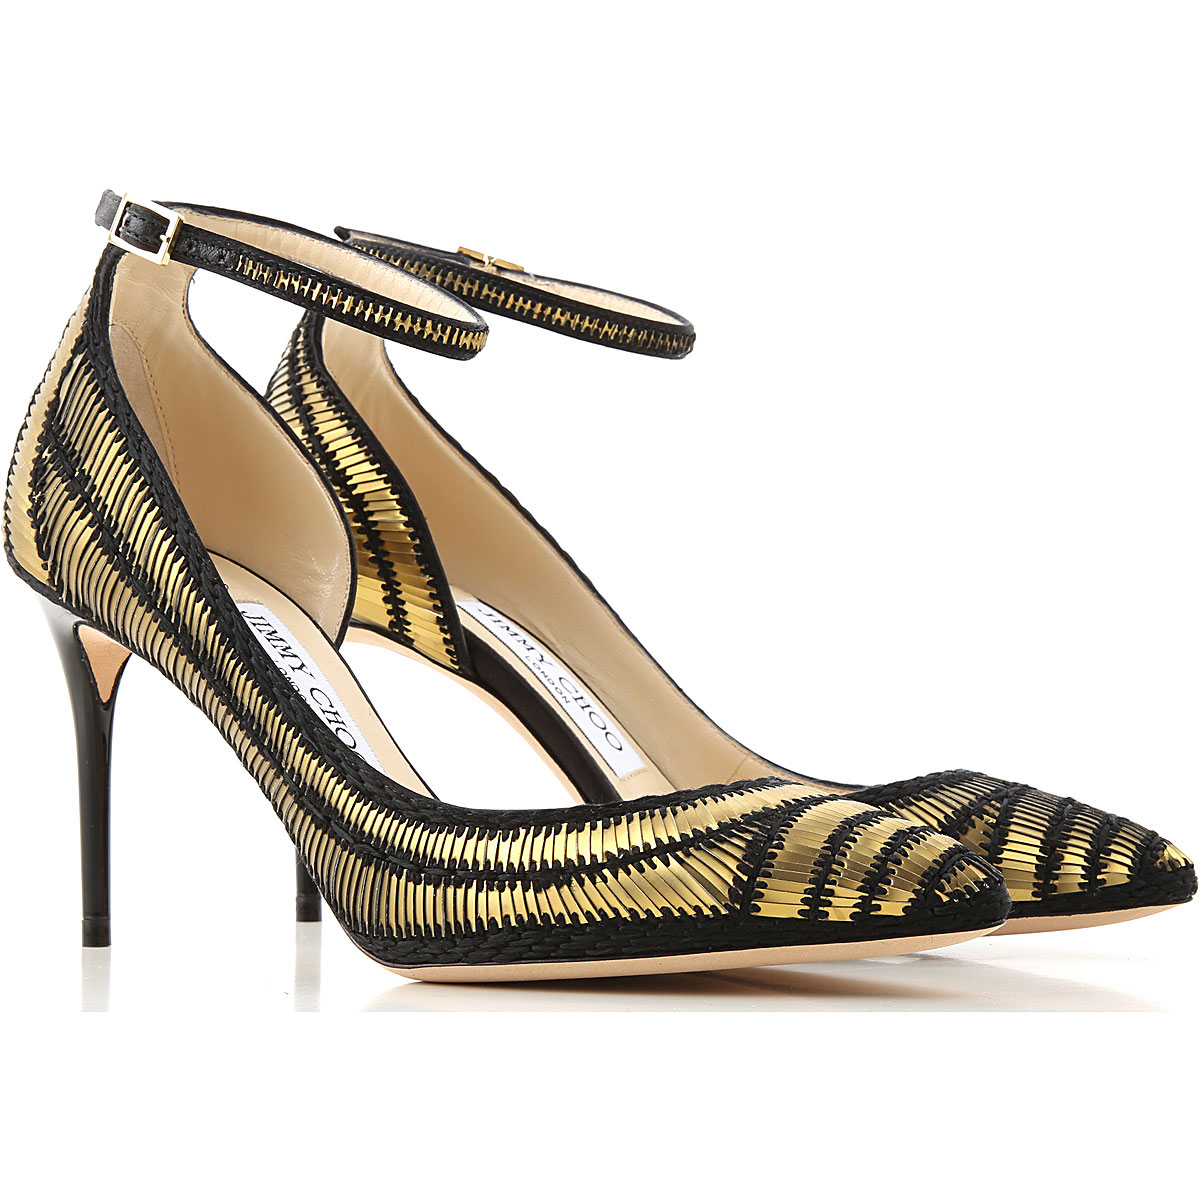 Womens Shoes Jimmy Choo, Style code: lucy85-umz-162